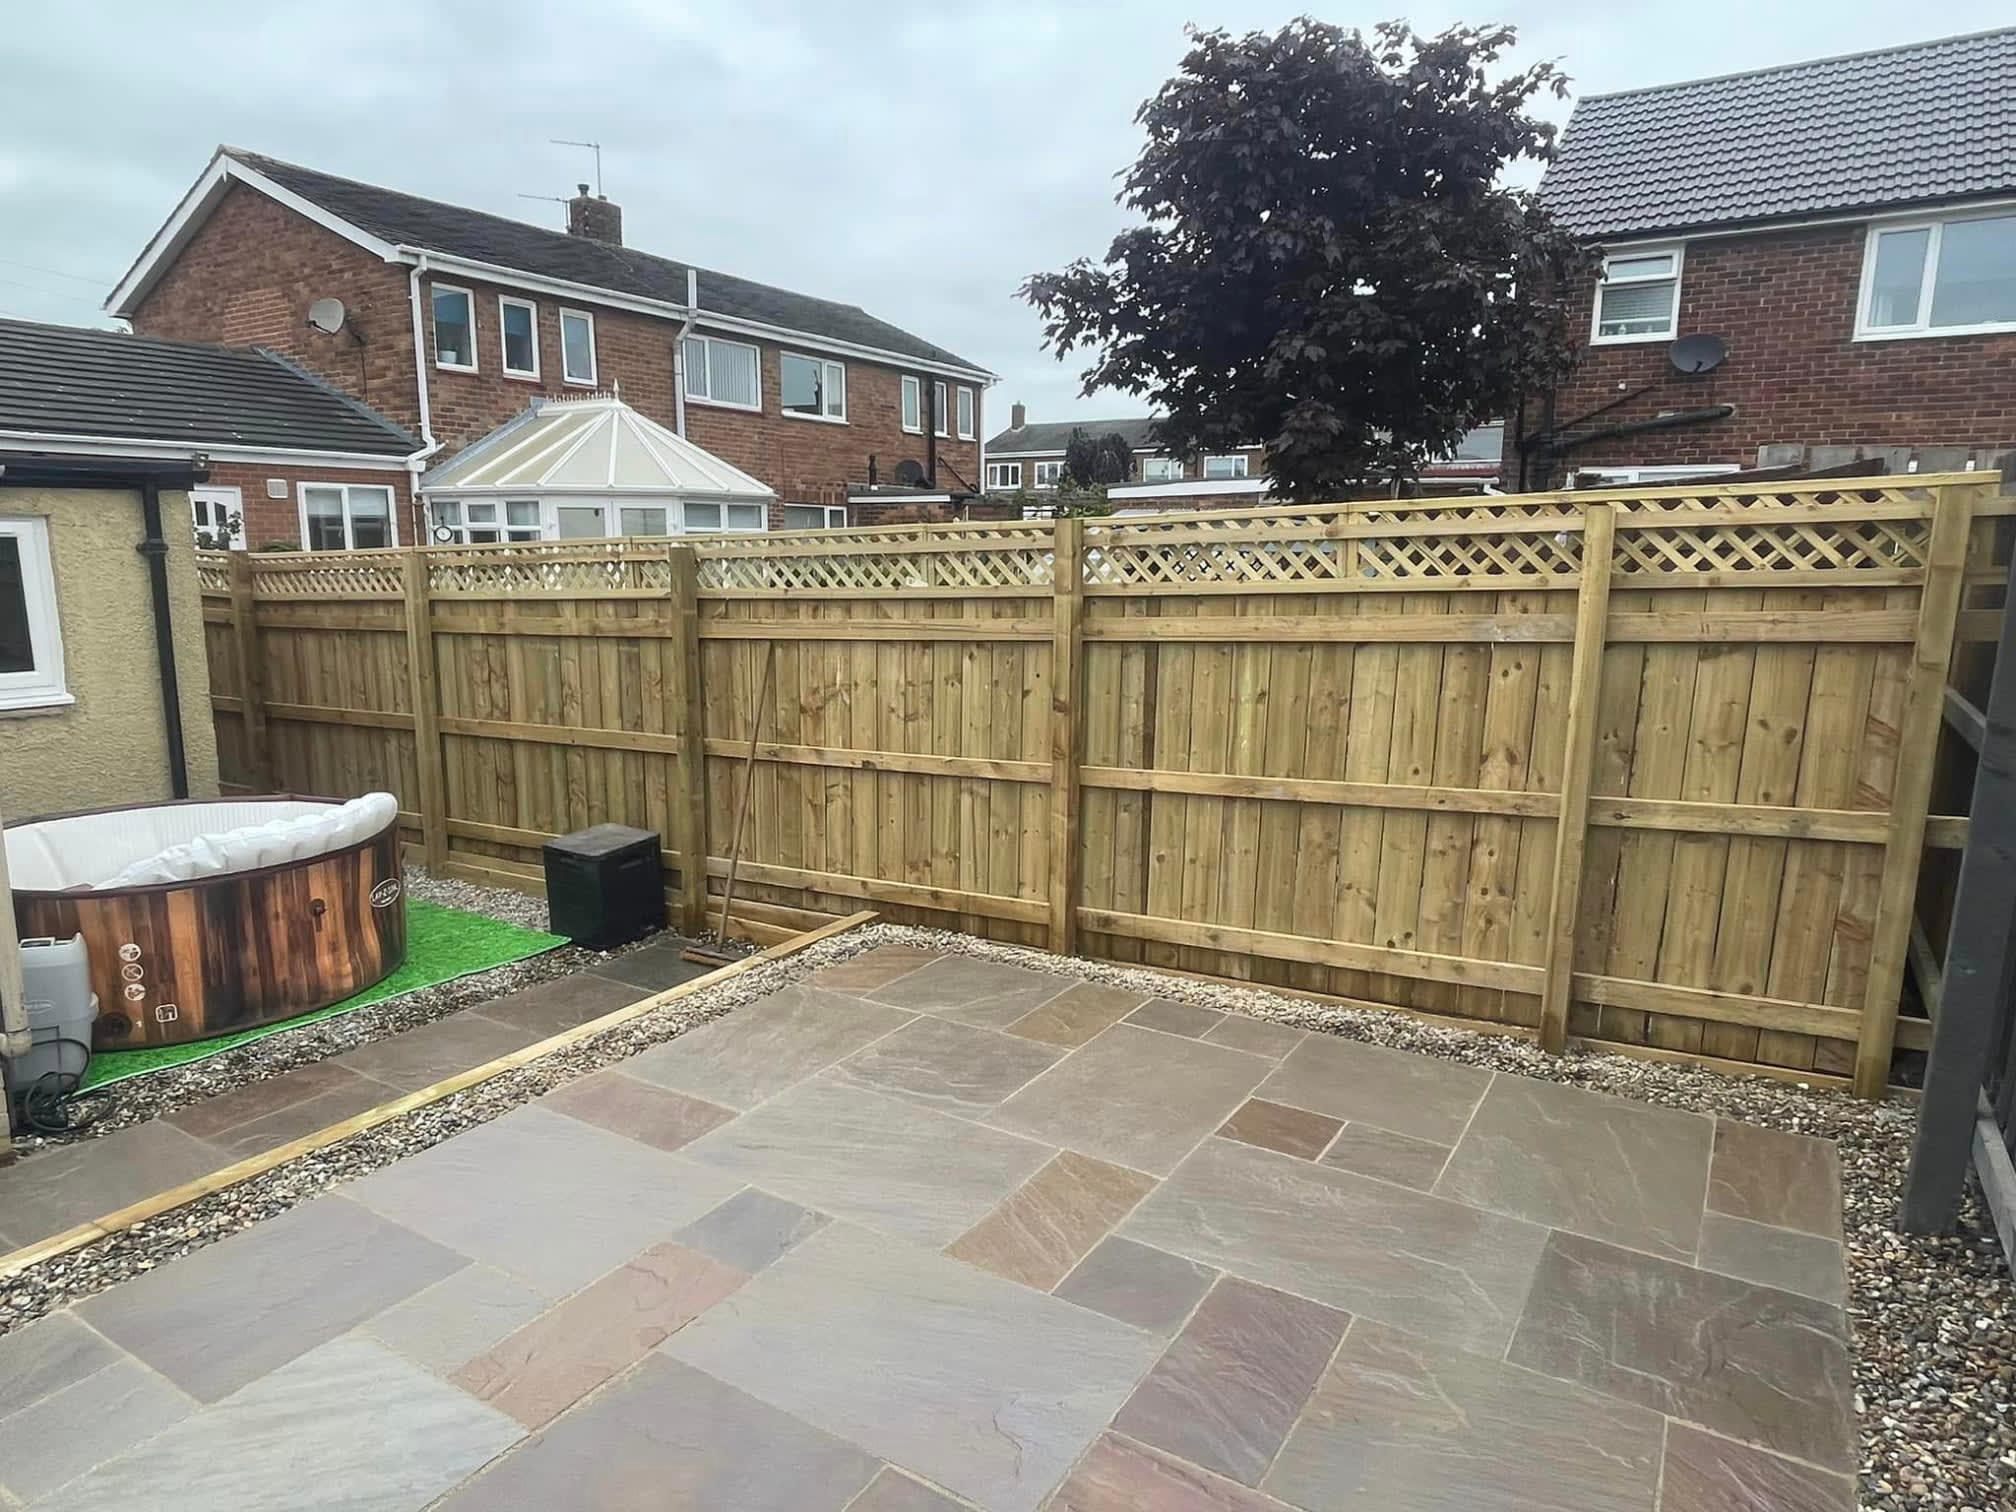 Images Custom Paving and Landscapes Limted